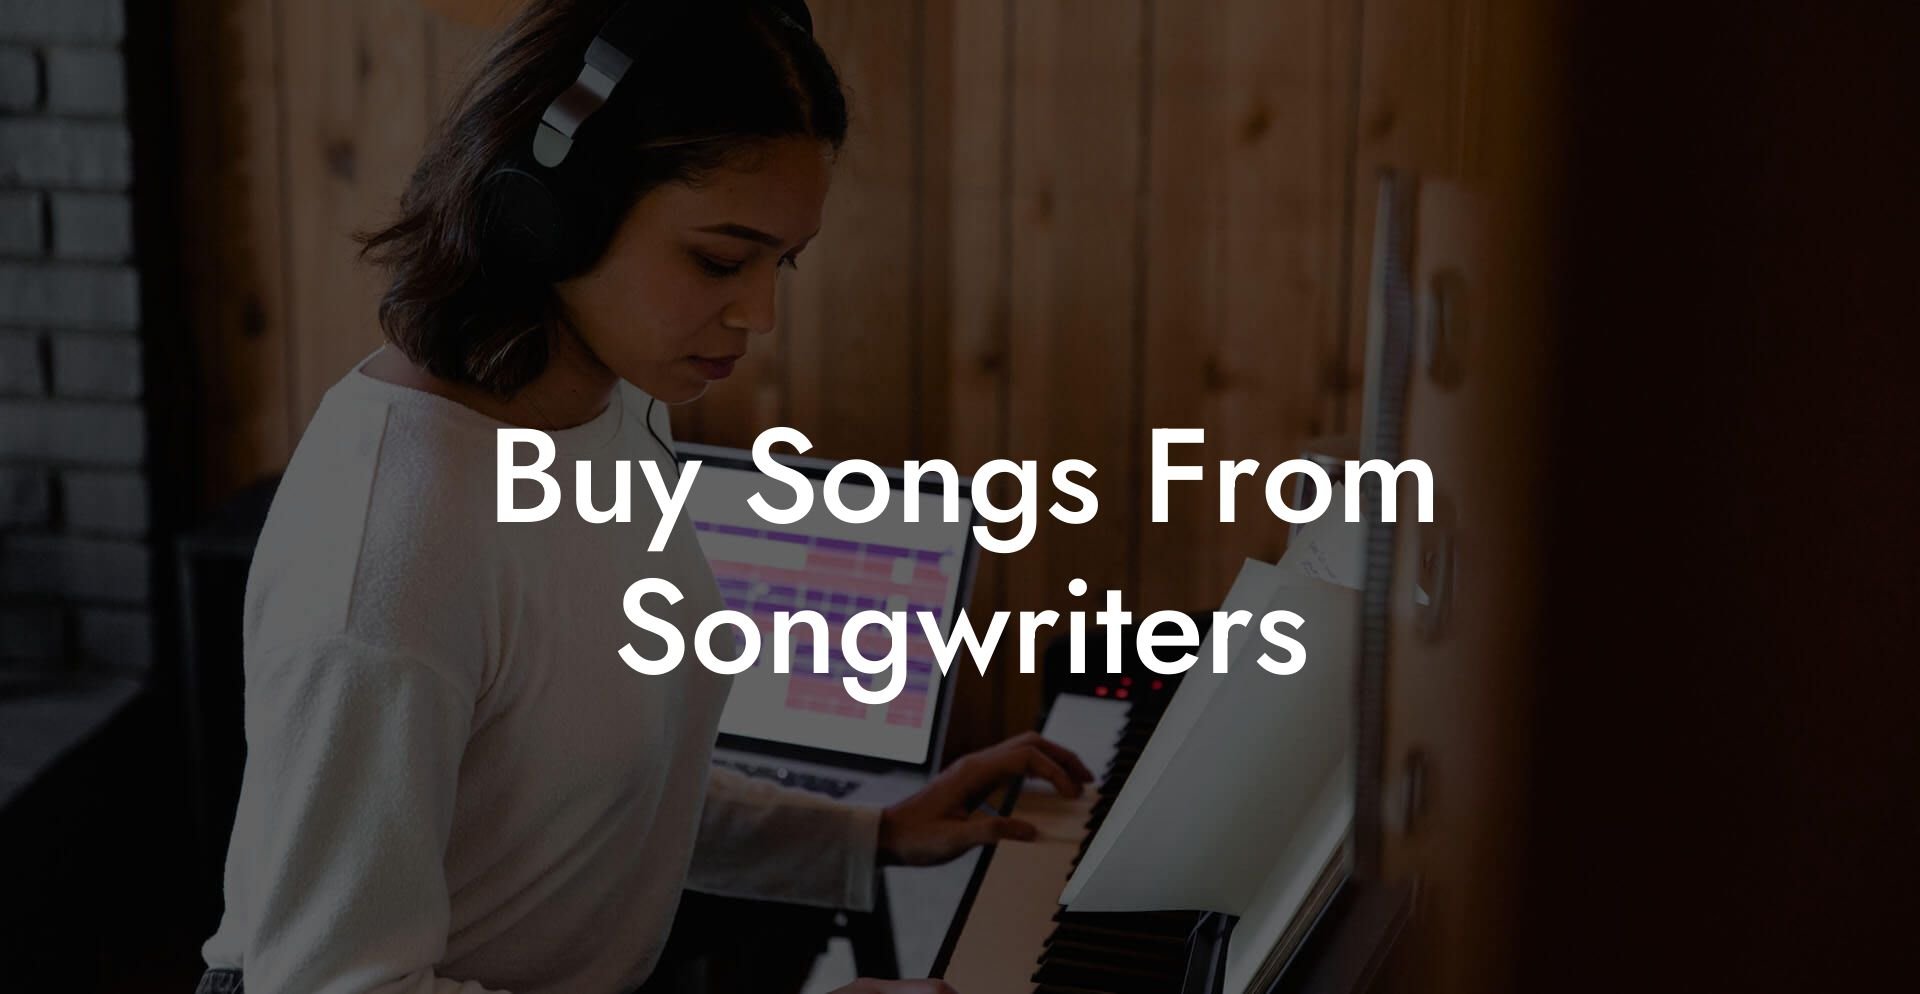 buy songs from songwriters lyric assistant